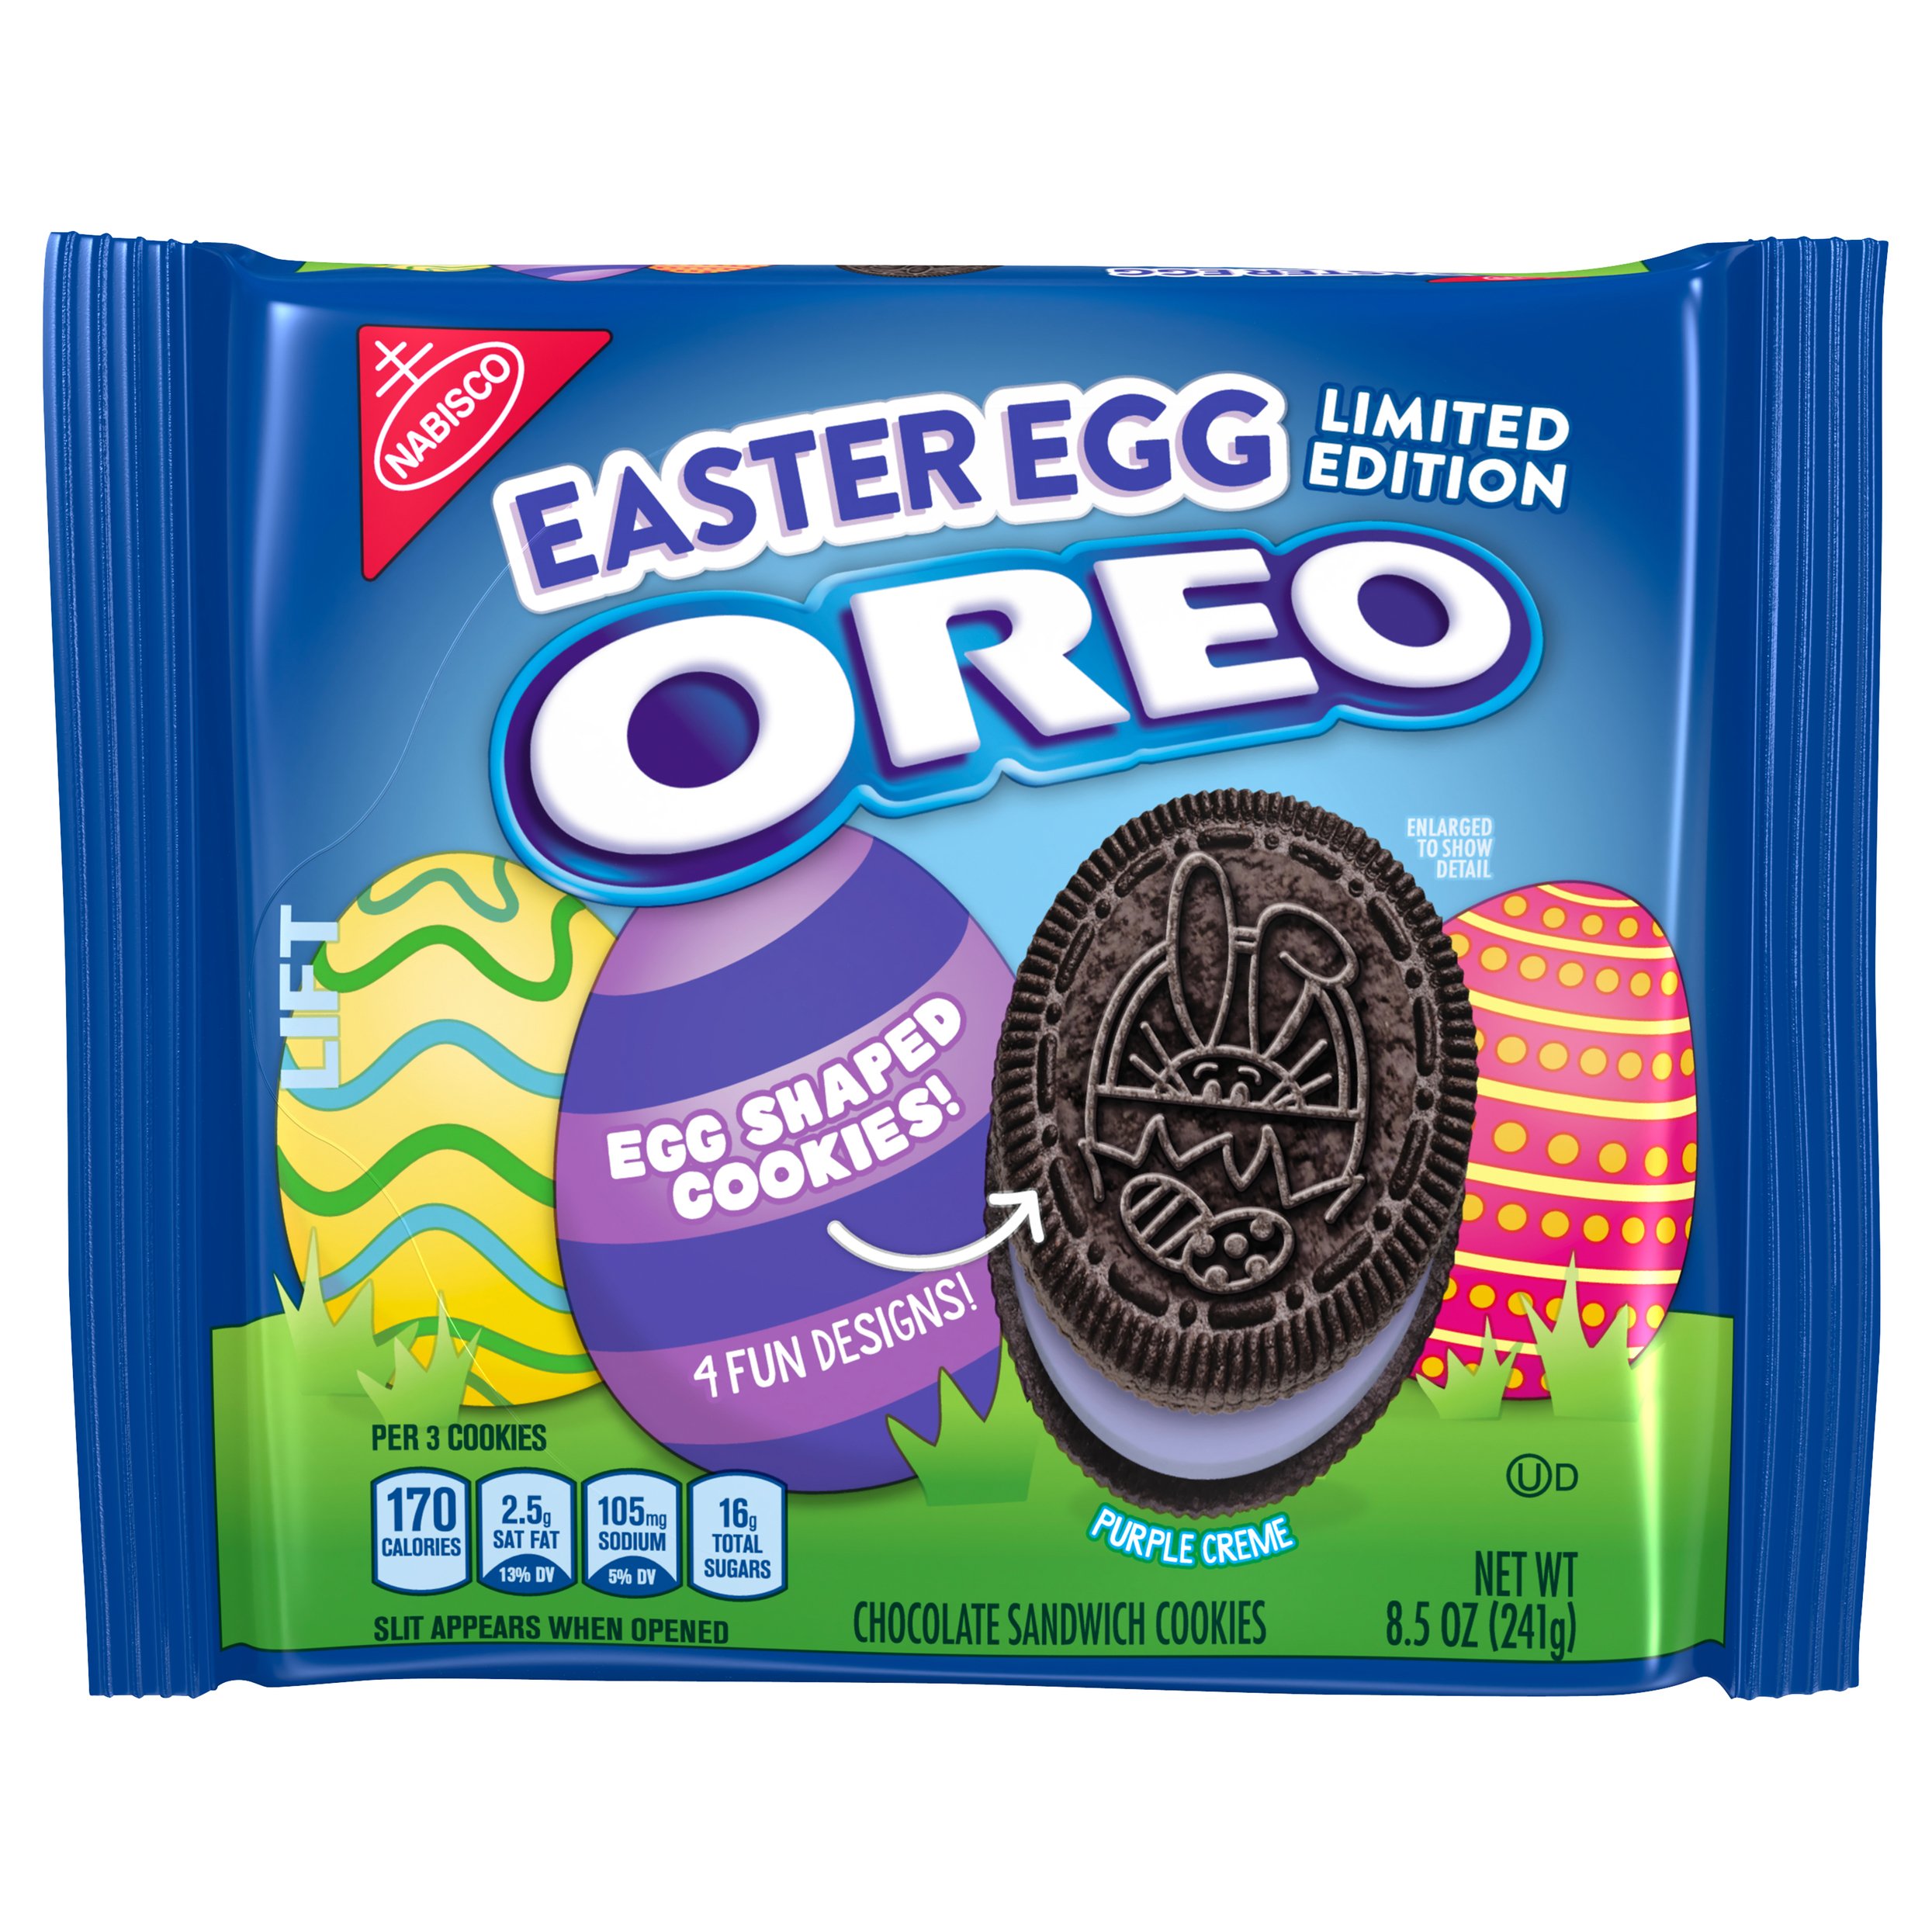 Nabisco Oreo Limited Edition Easter Egg Purple Creme Sandwich Cookies